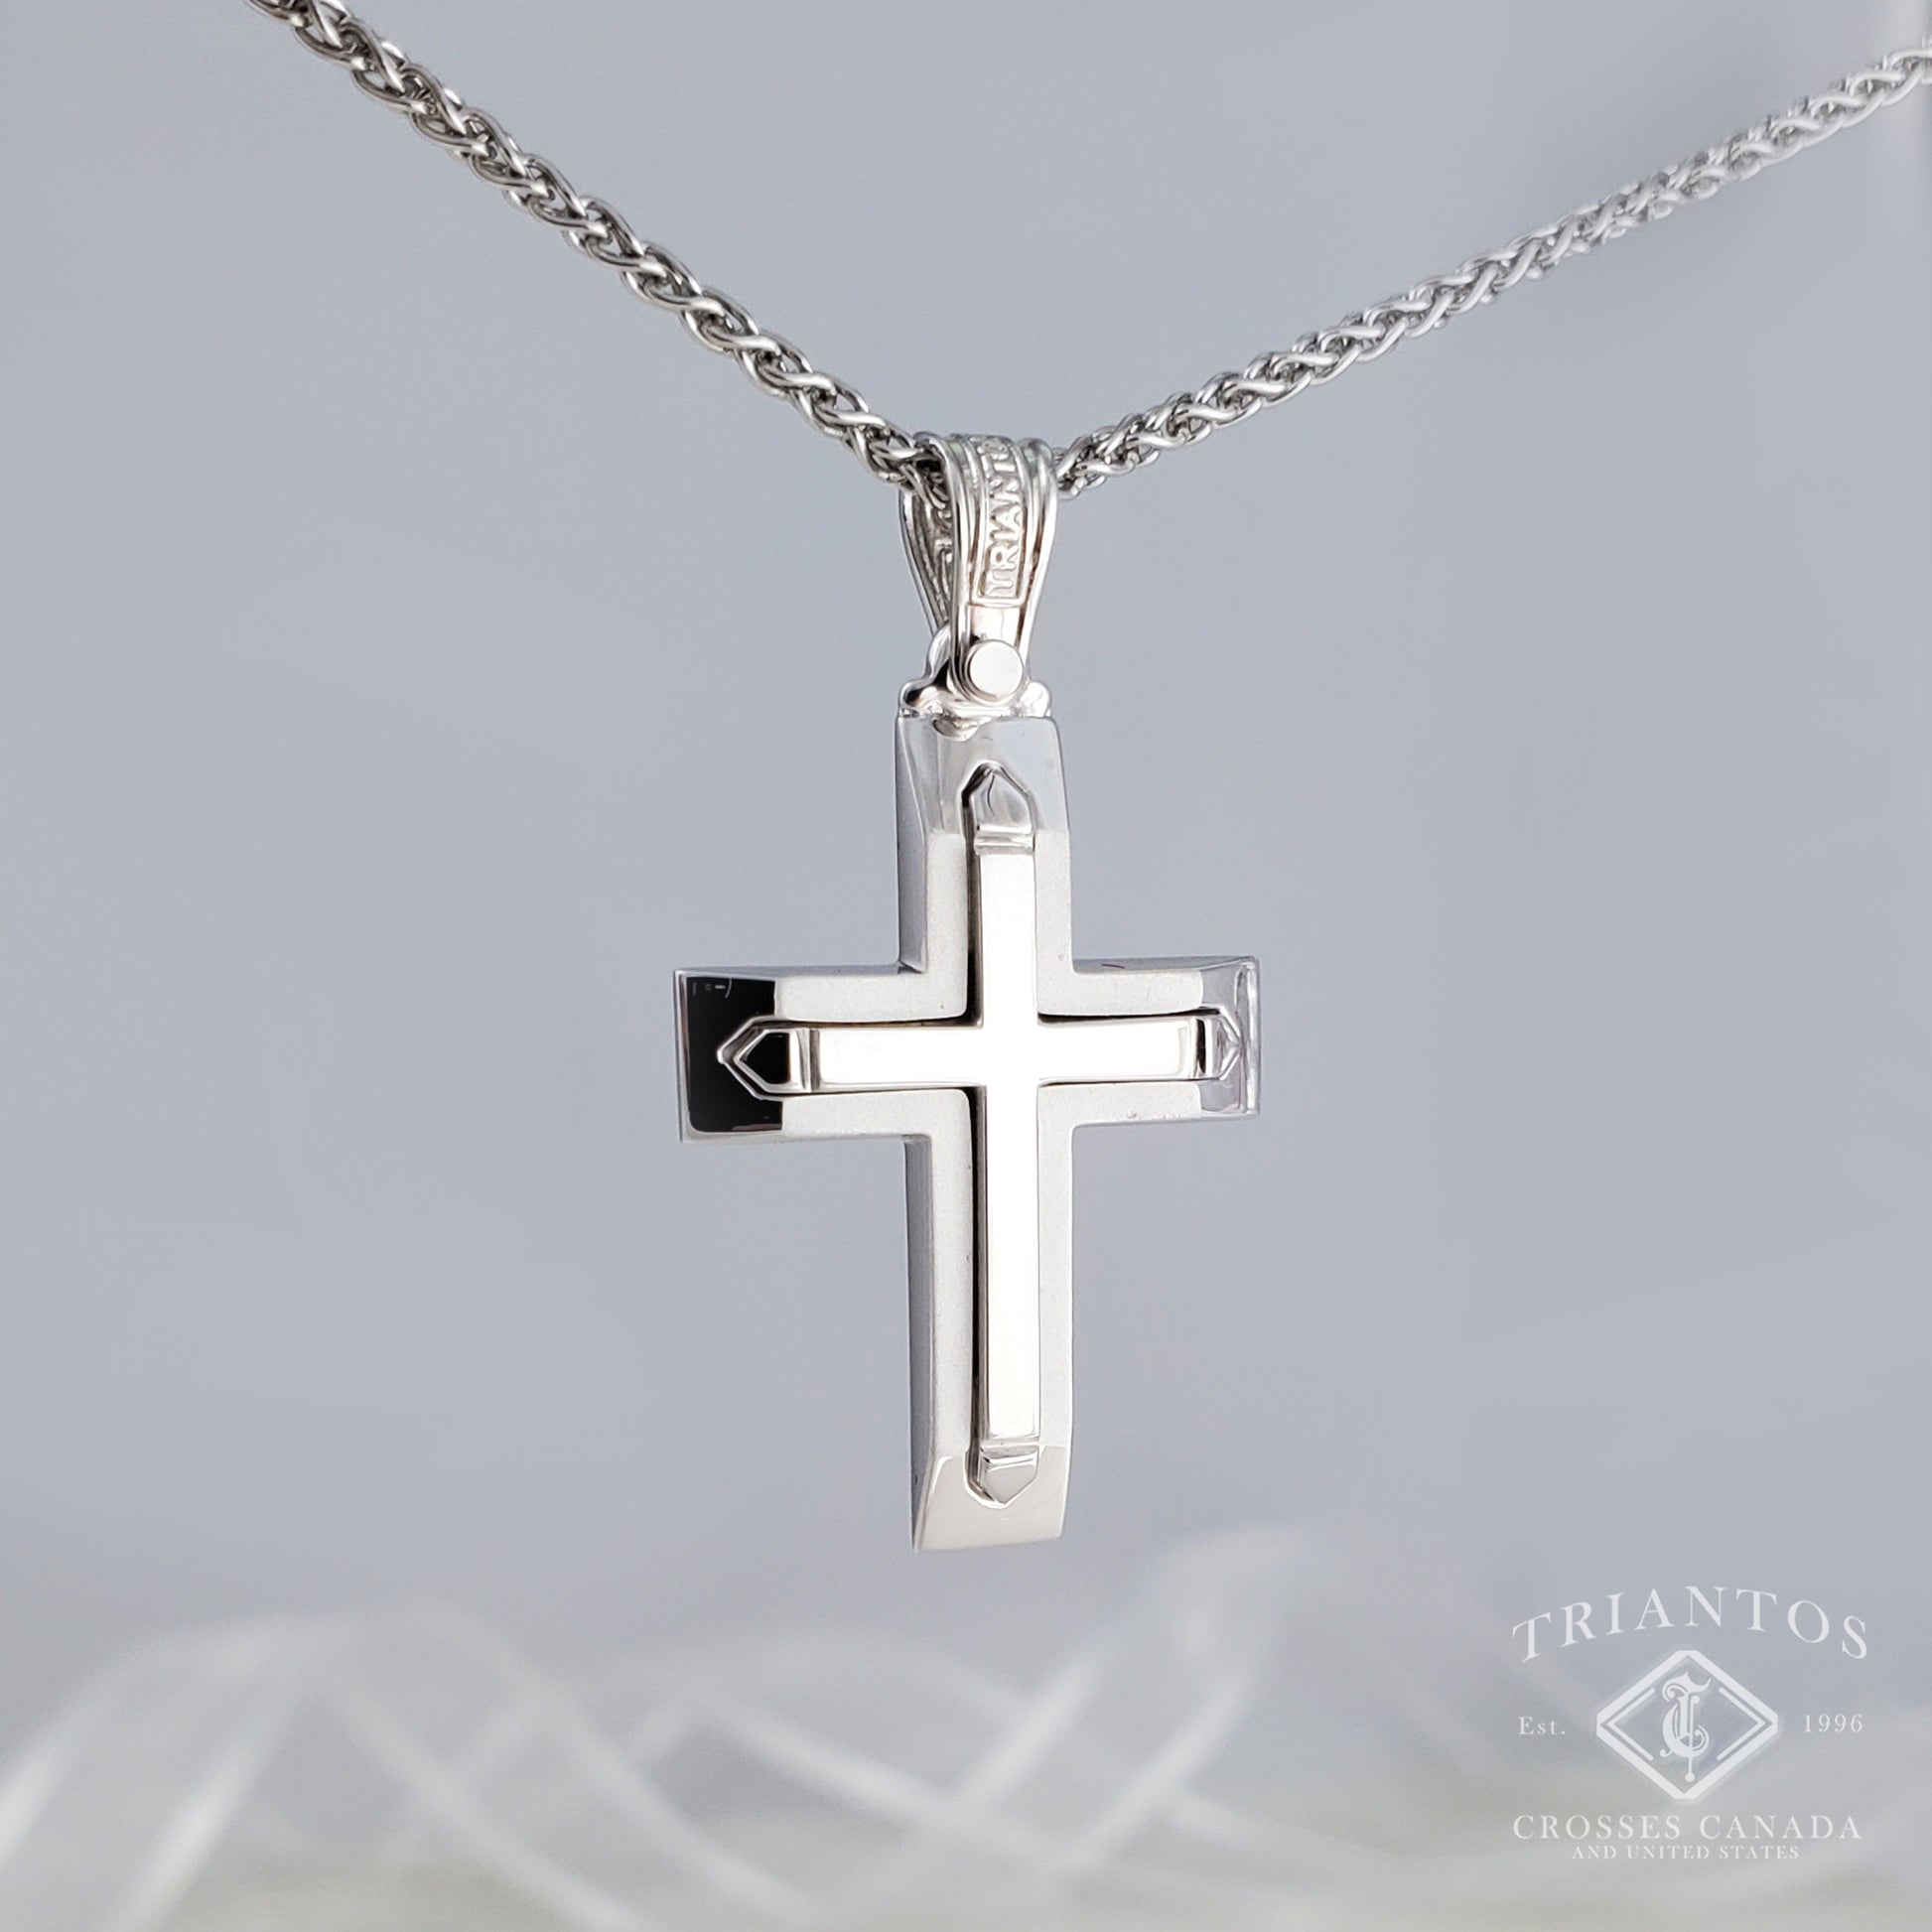 unisex Orthodox Christian Triantos cross pendant made in Greece suspended on a white gold chain